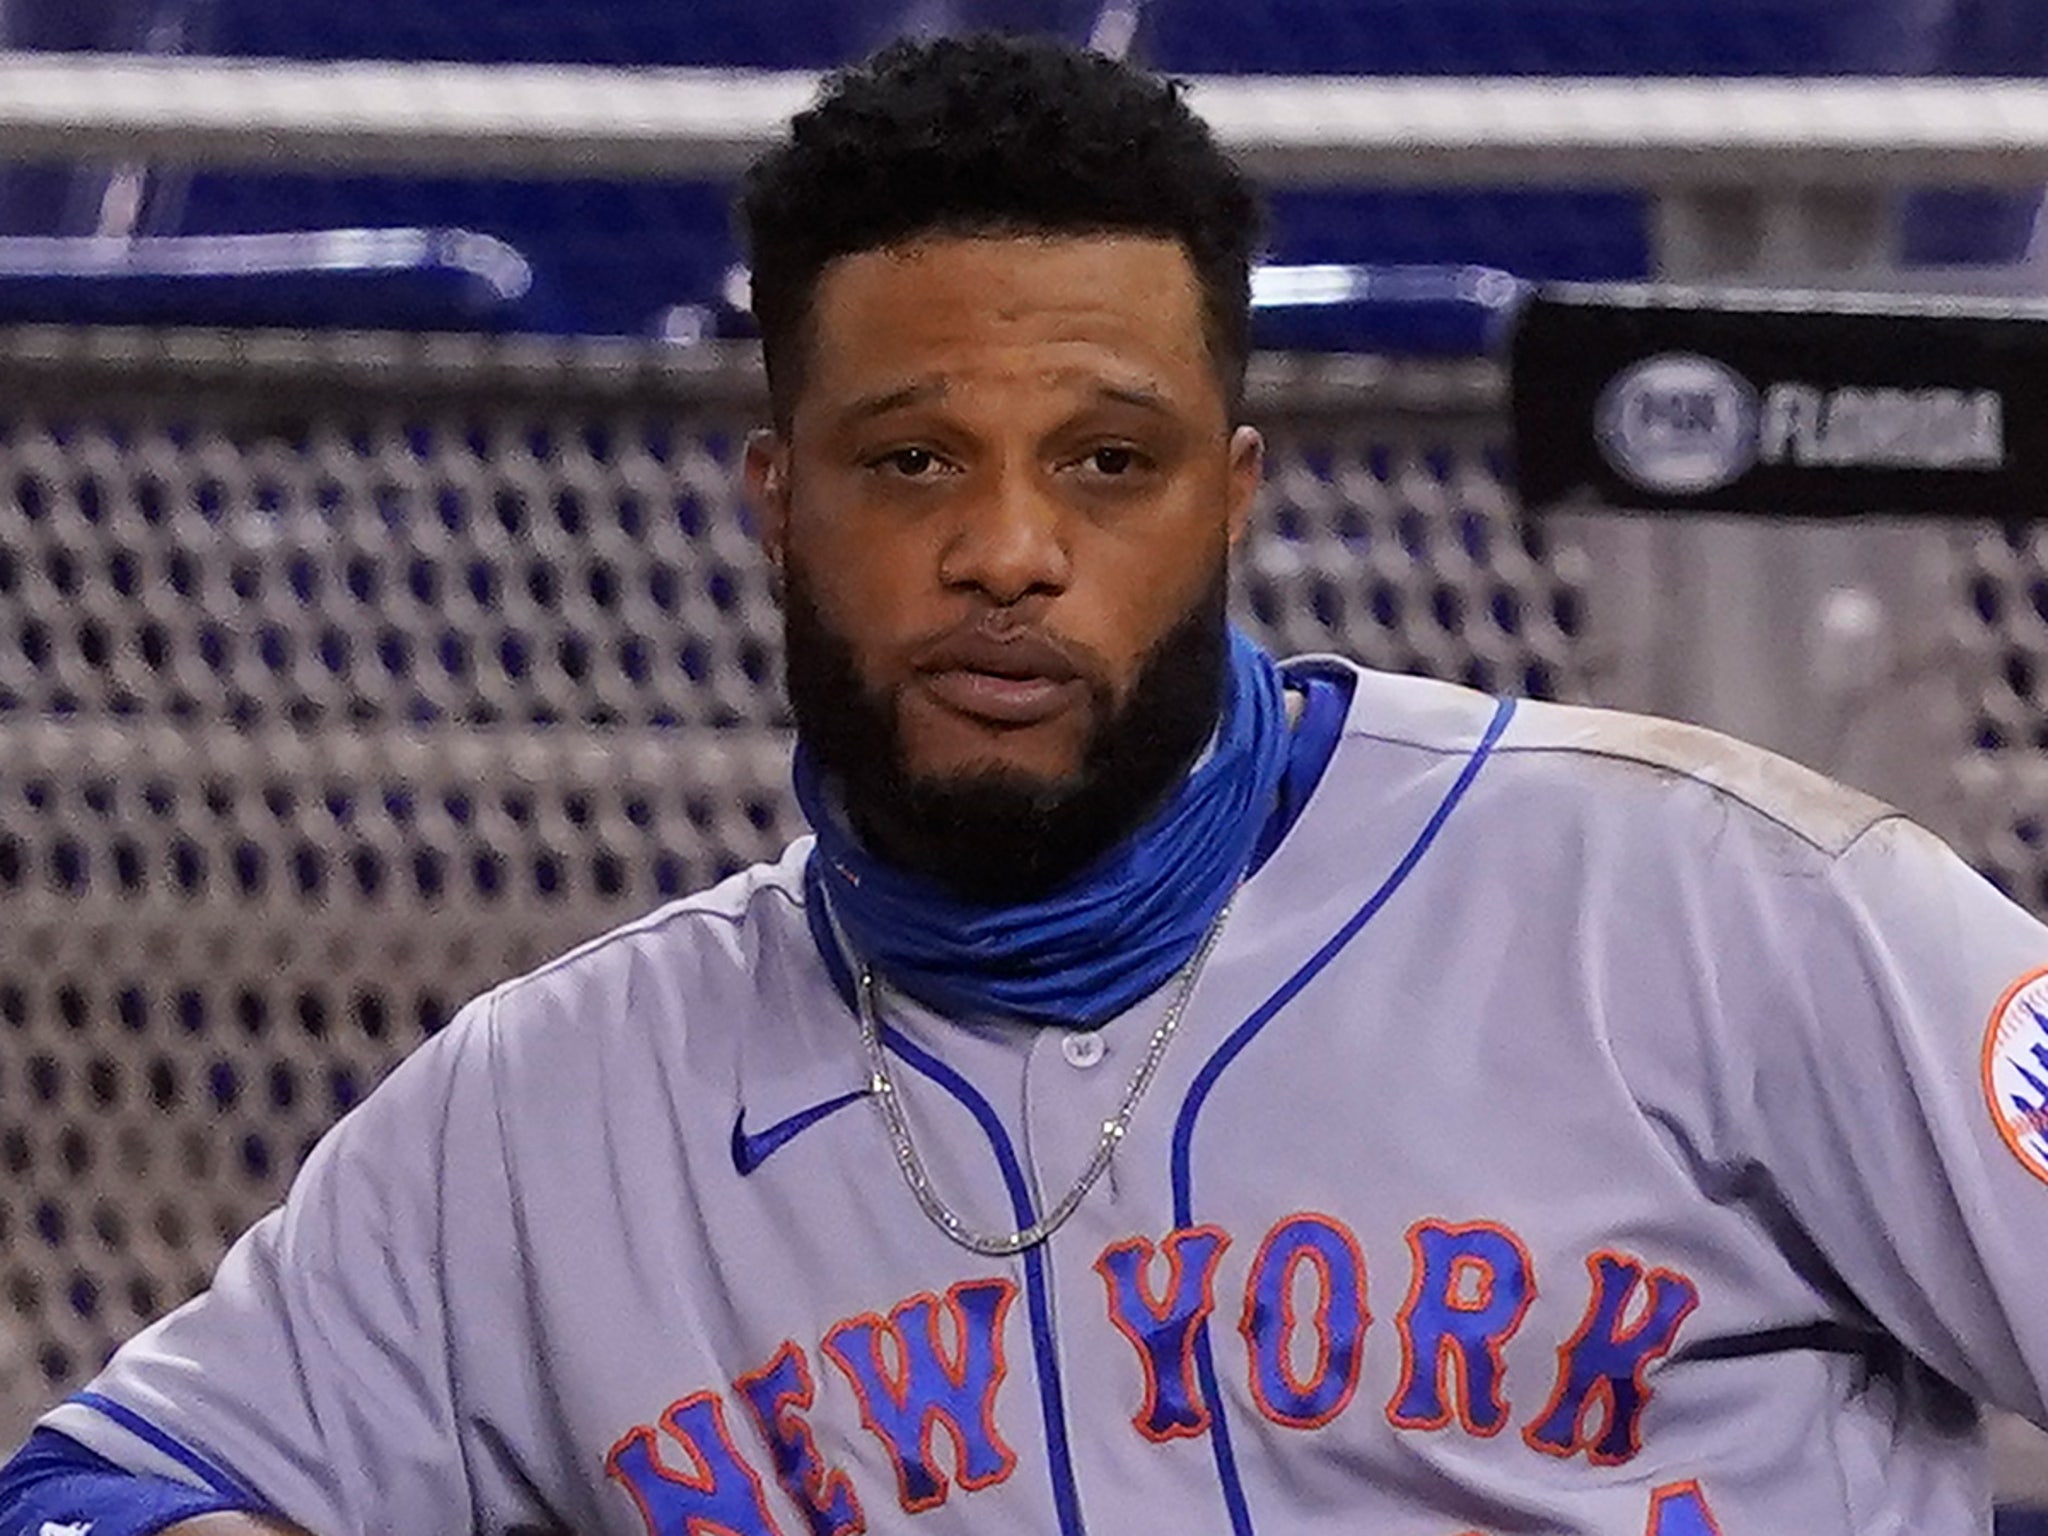 Robinson Cano's trying year: Lingering illness, grandfather's death